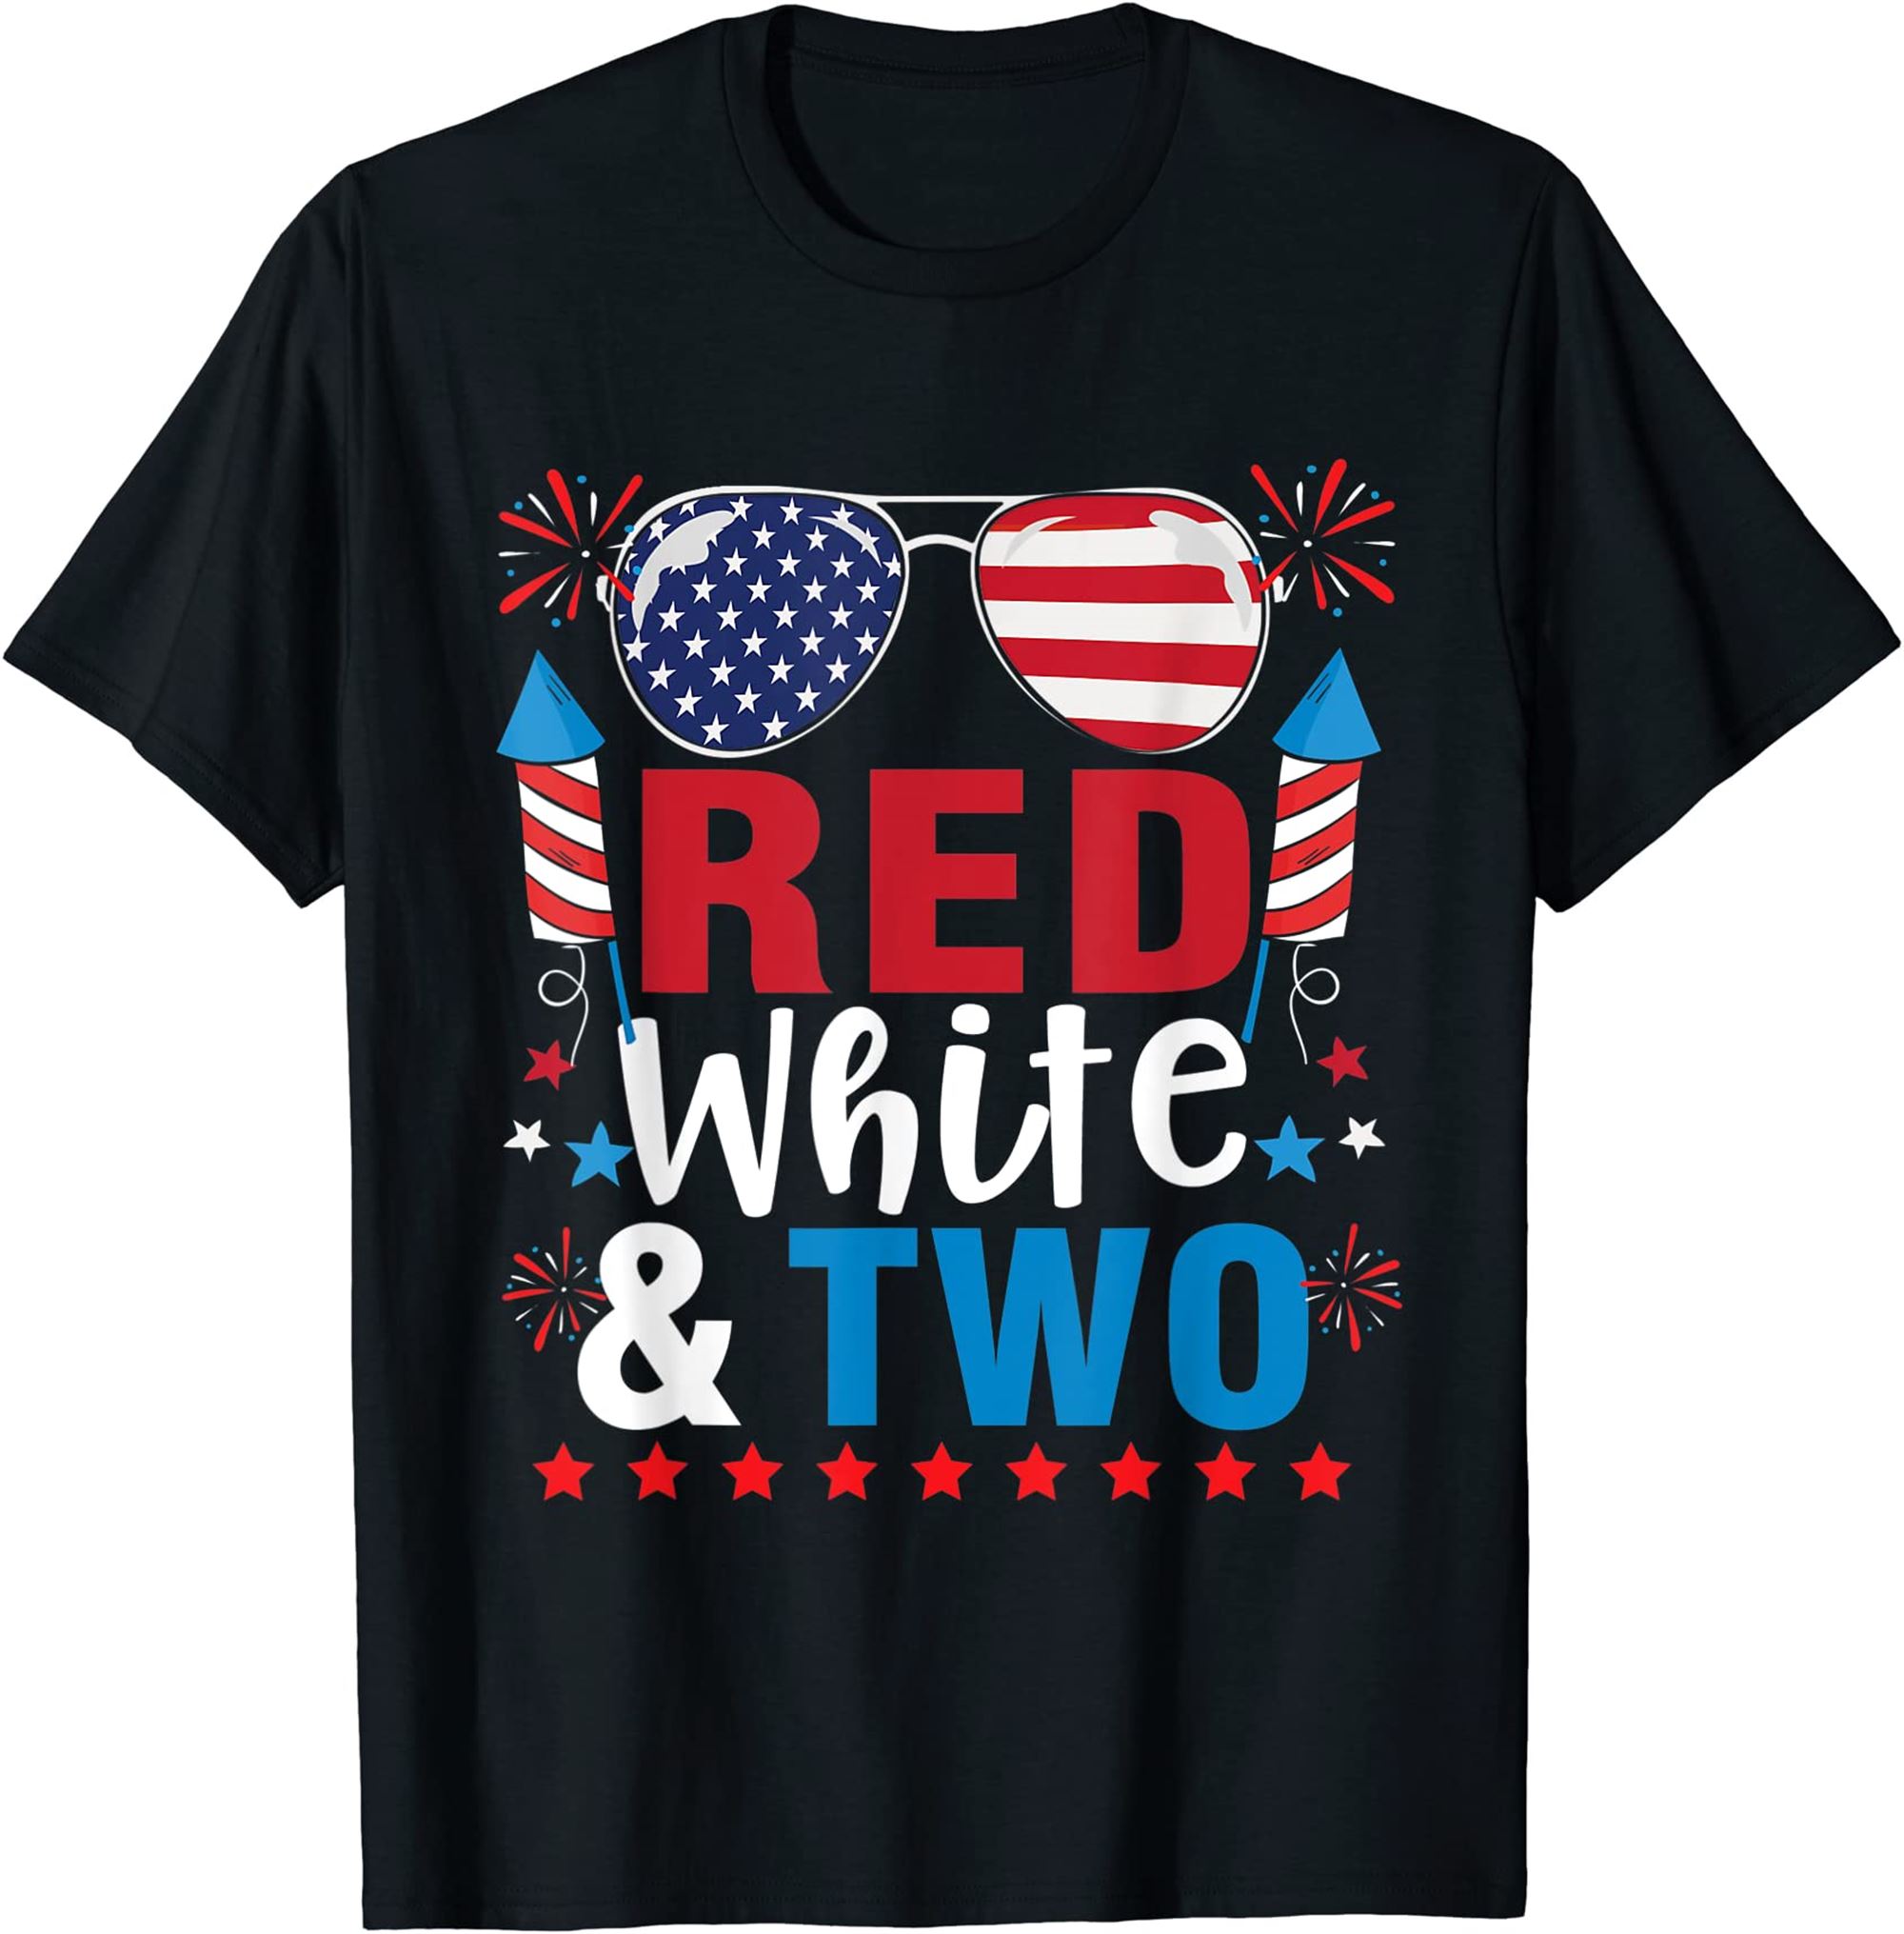 Red White Two Funny 2nd Birthday 4th Of July Boys Kids T-shirt Size Up To 5xl